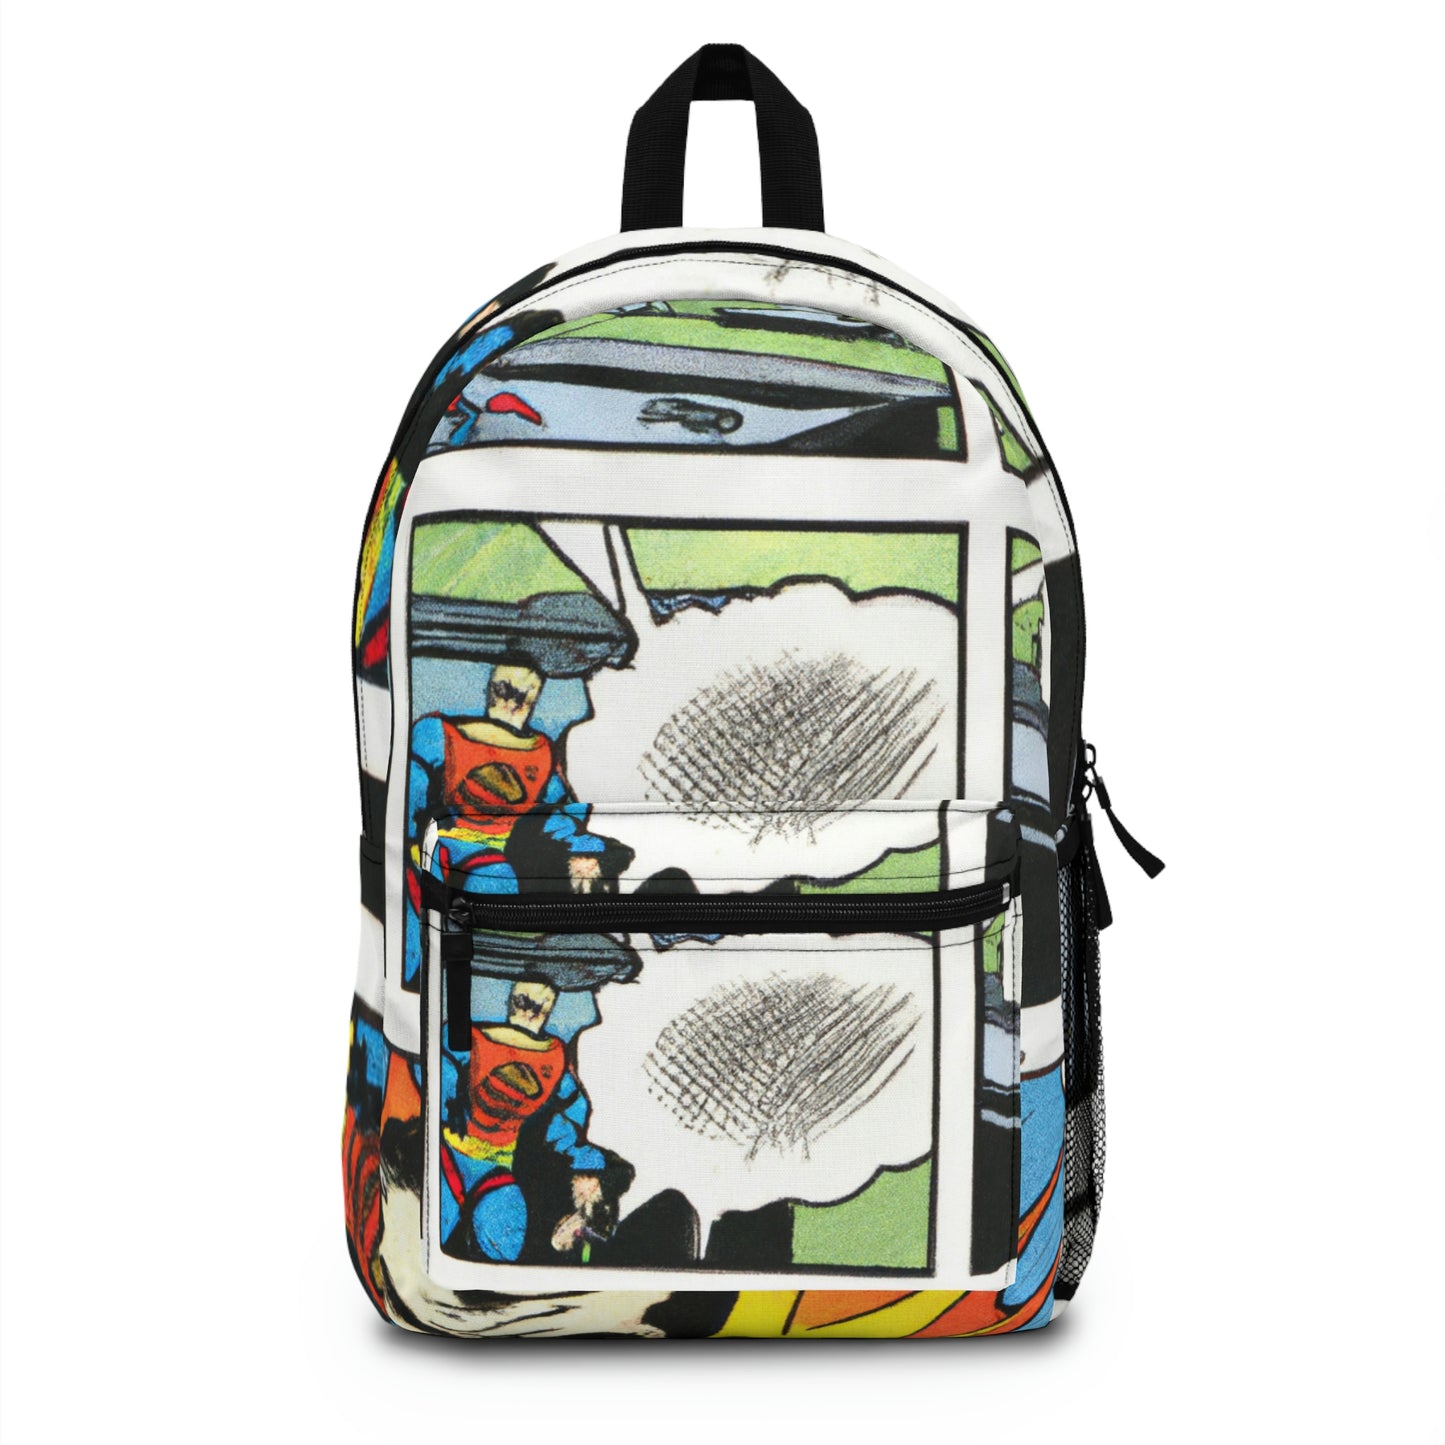 Sparkles McGee - Comic Book Backpack